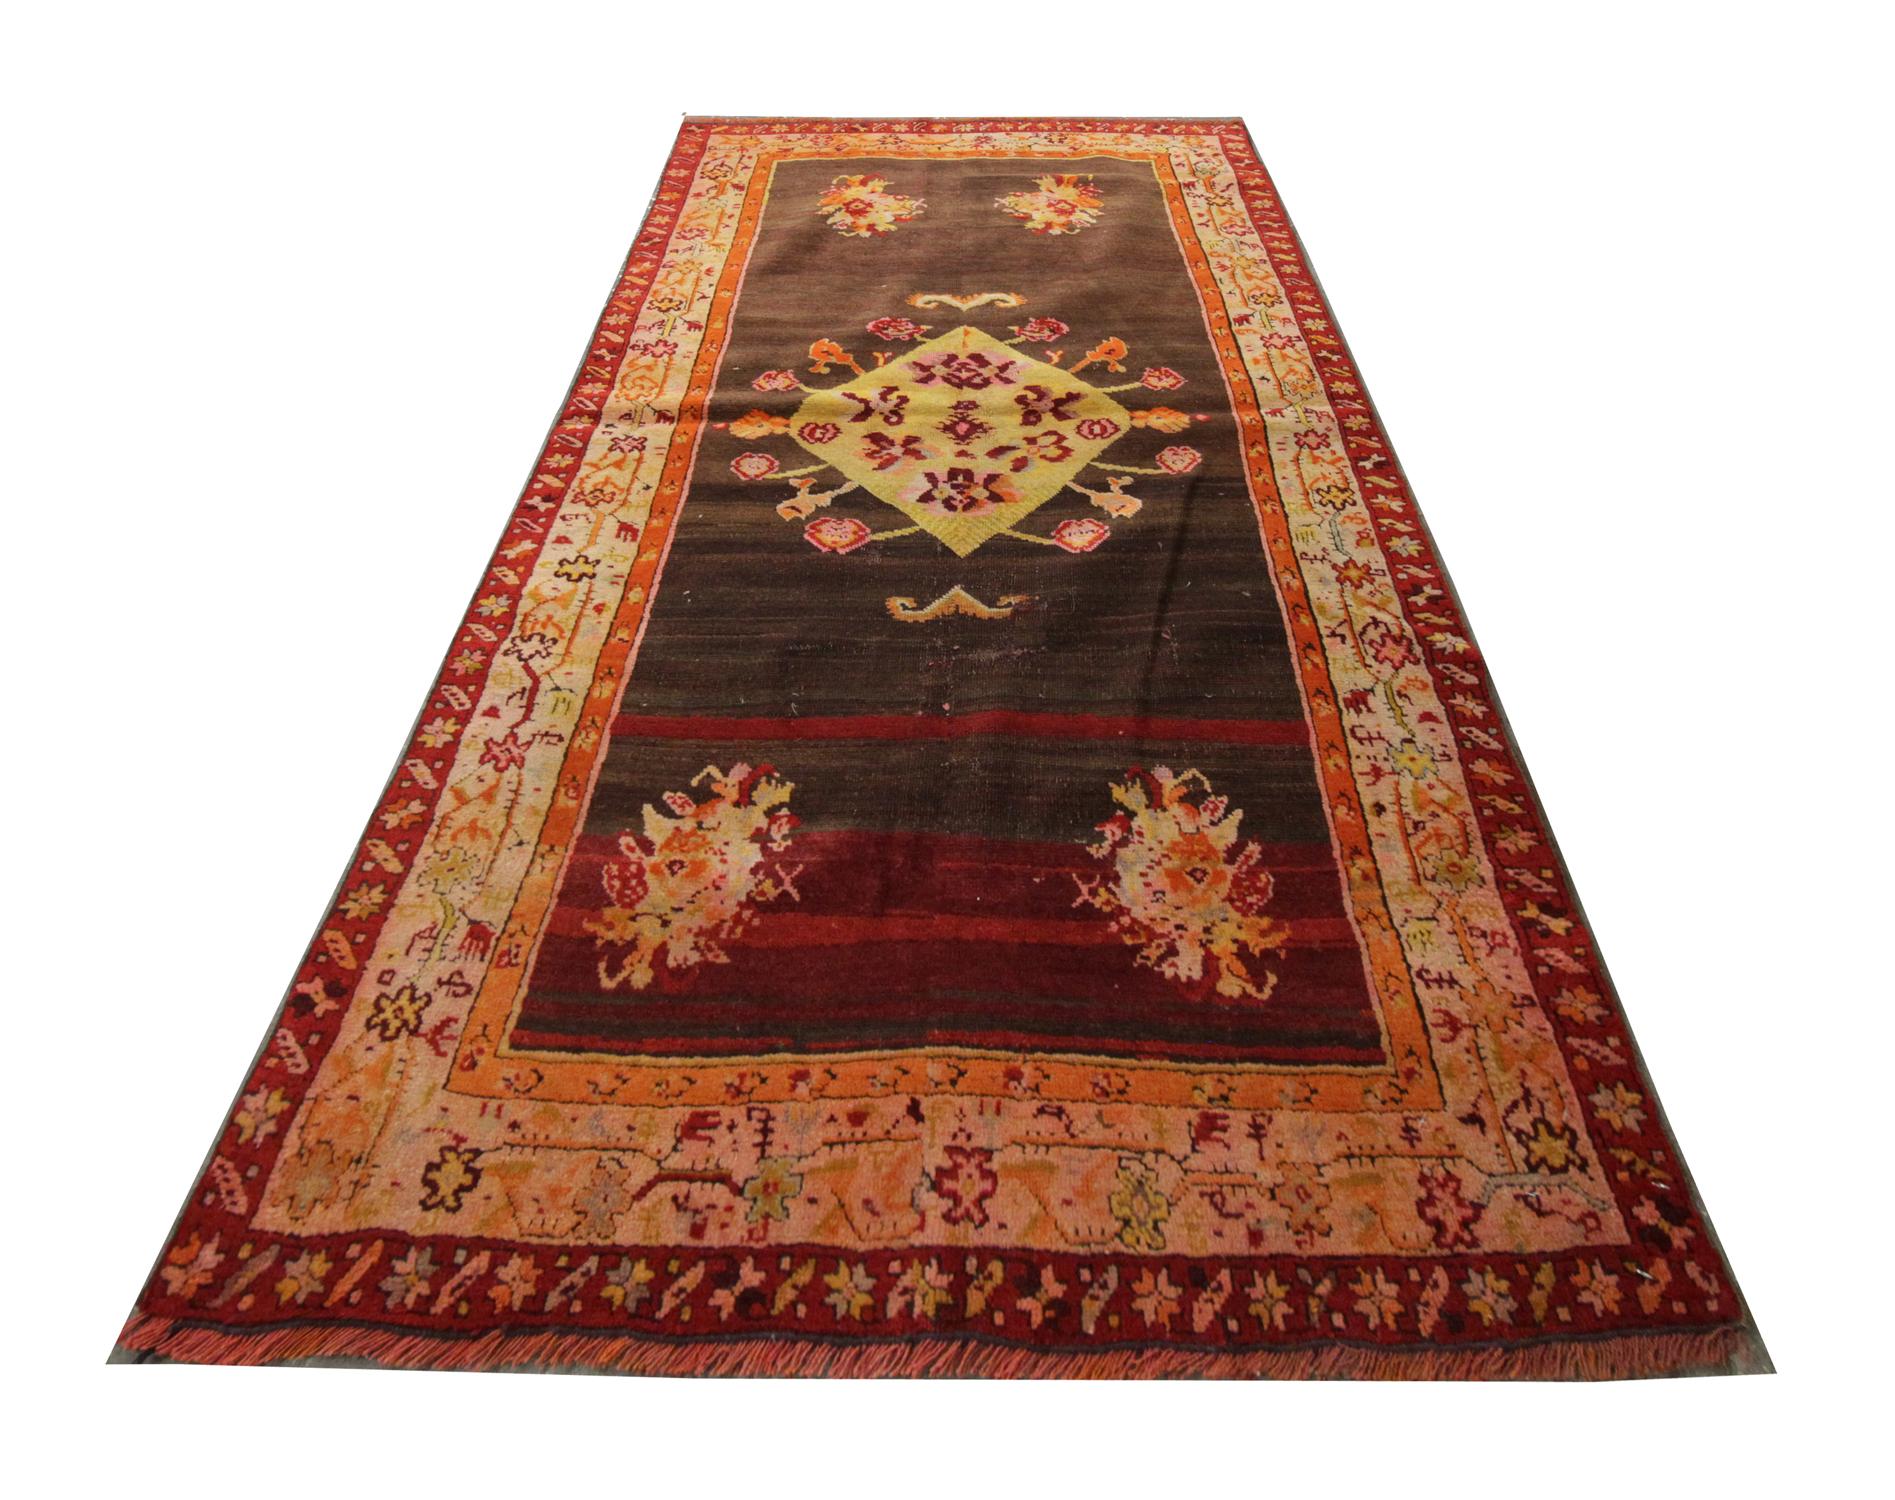 This Oriental rug handmade carpet features muted tones of brown and orange weaved with a rich floral multi-layered border and an intricate central motif. On a brown background, the central motif contrasts elegantly woven in yellow and orange. This